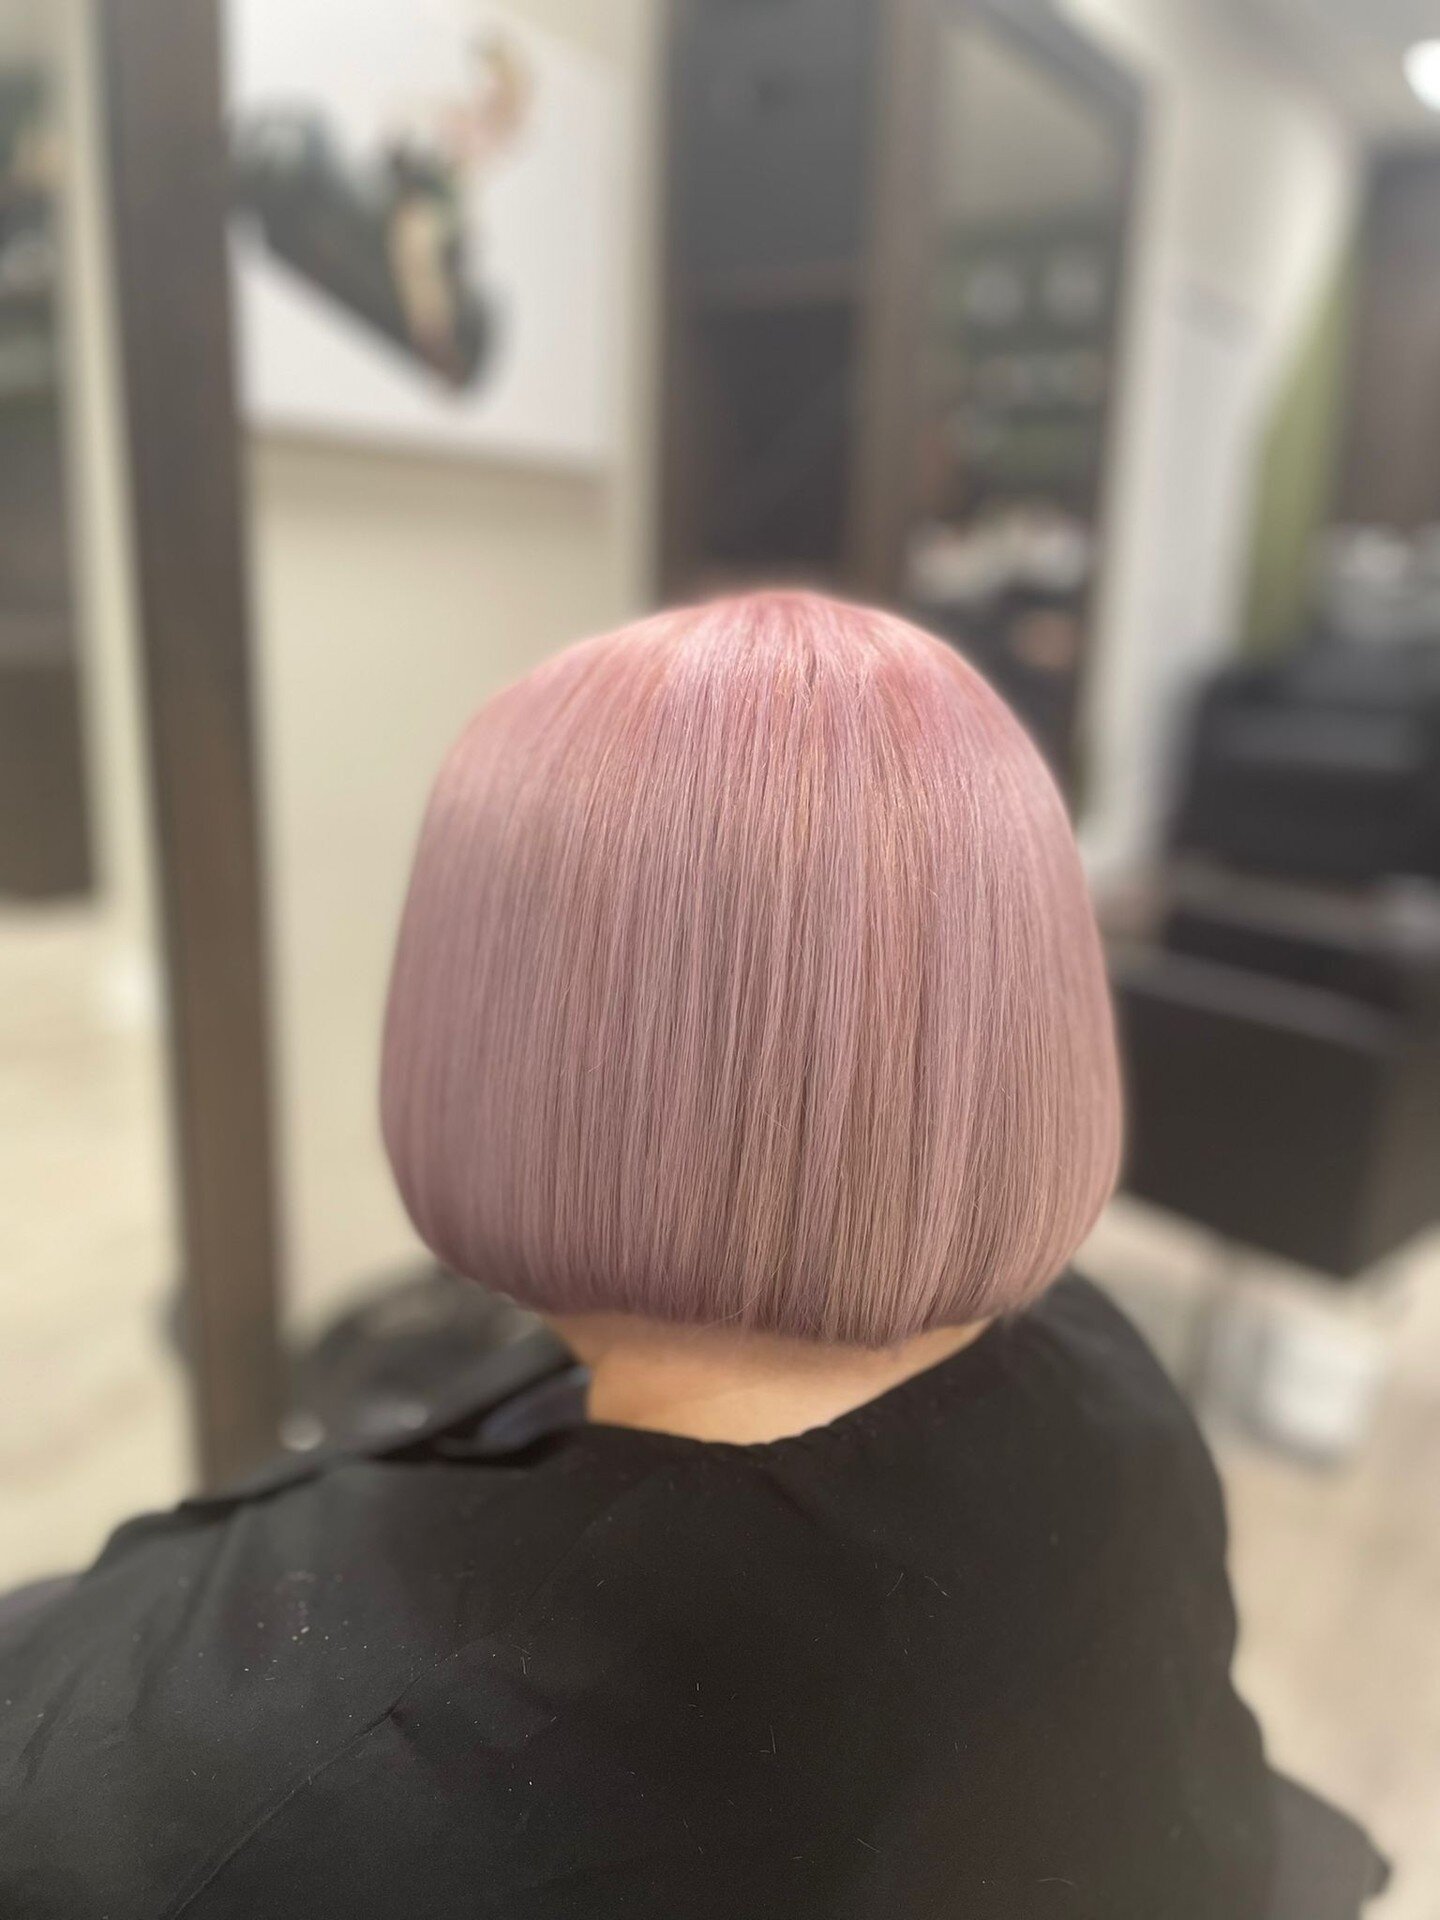 Live colourfully or dye trying 🌈

We transformed this client's look using @pulpriot.uk and we are LOVING the results 😍

Check out the before 👉

📱 0151 236 5421
💻 www.dothair.co.uk

#dothairliverpool #lorealpro #lorealpro #iamahairartist #iamahai